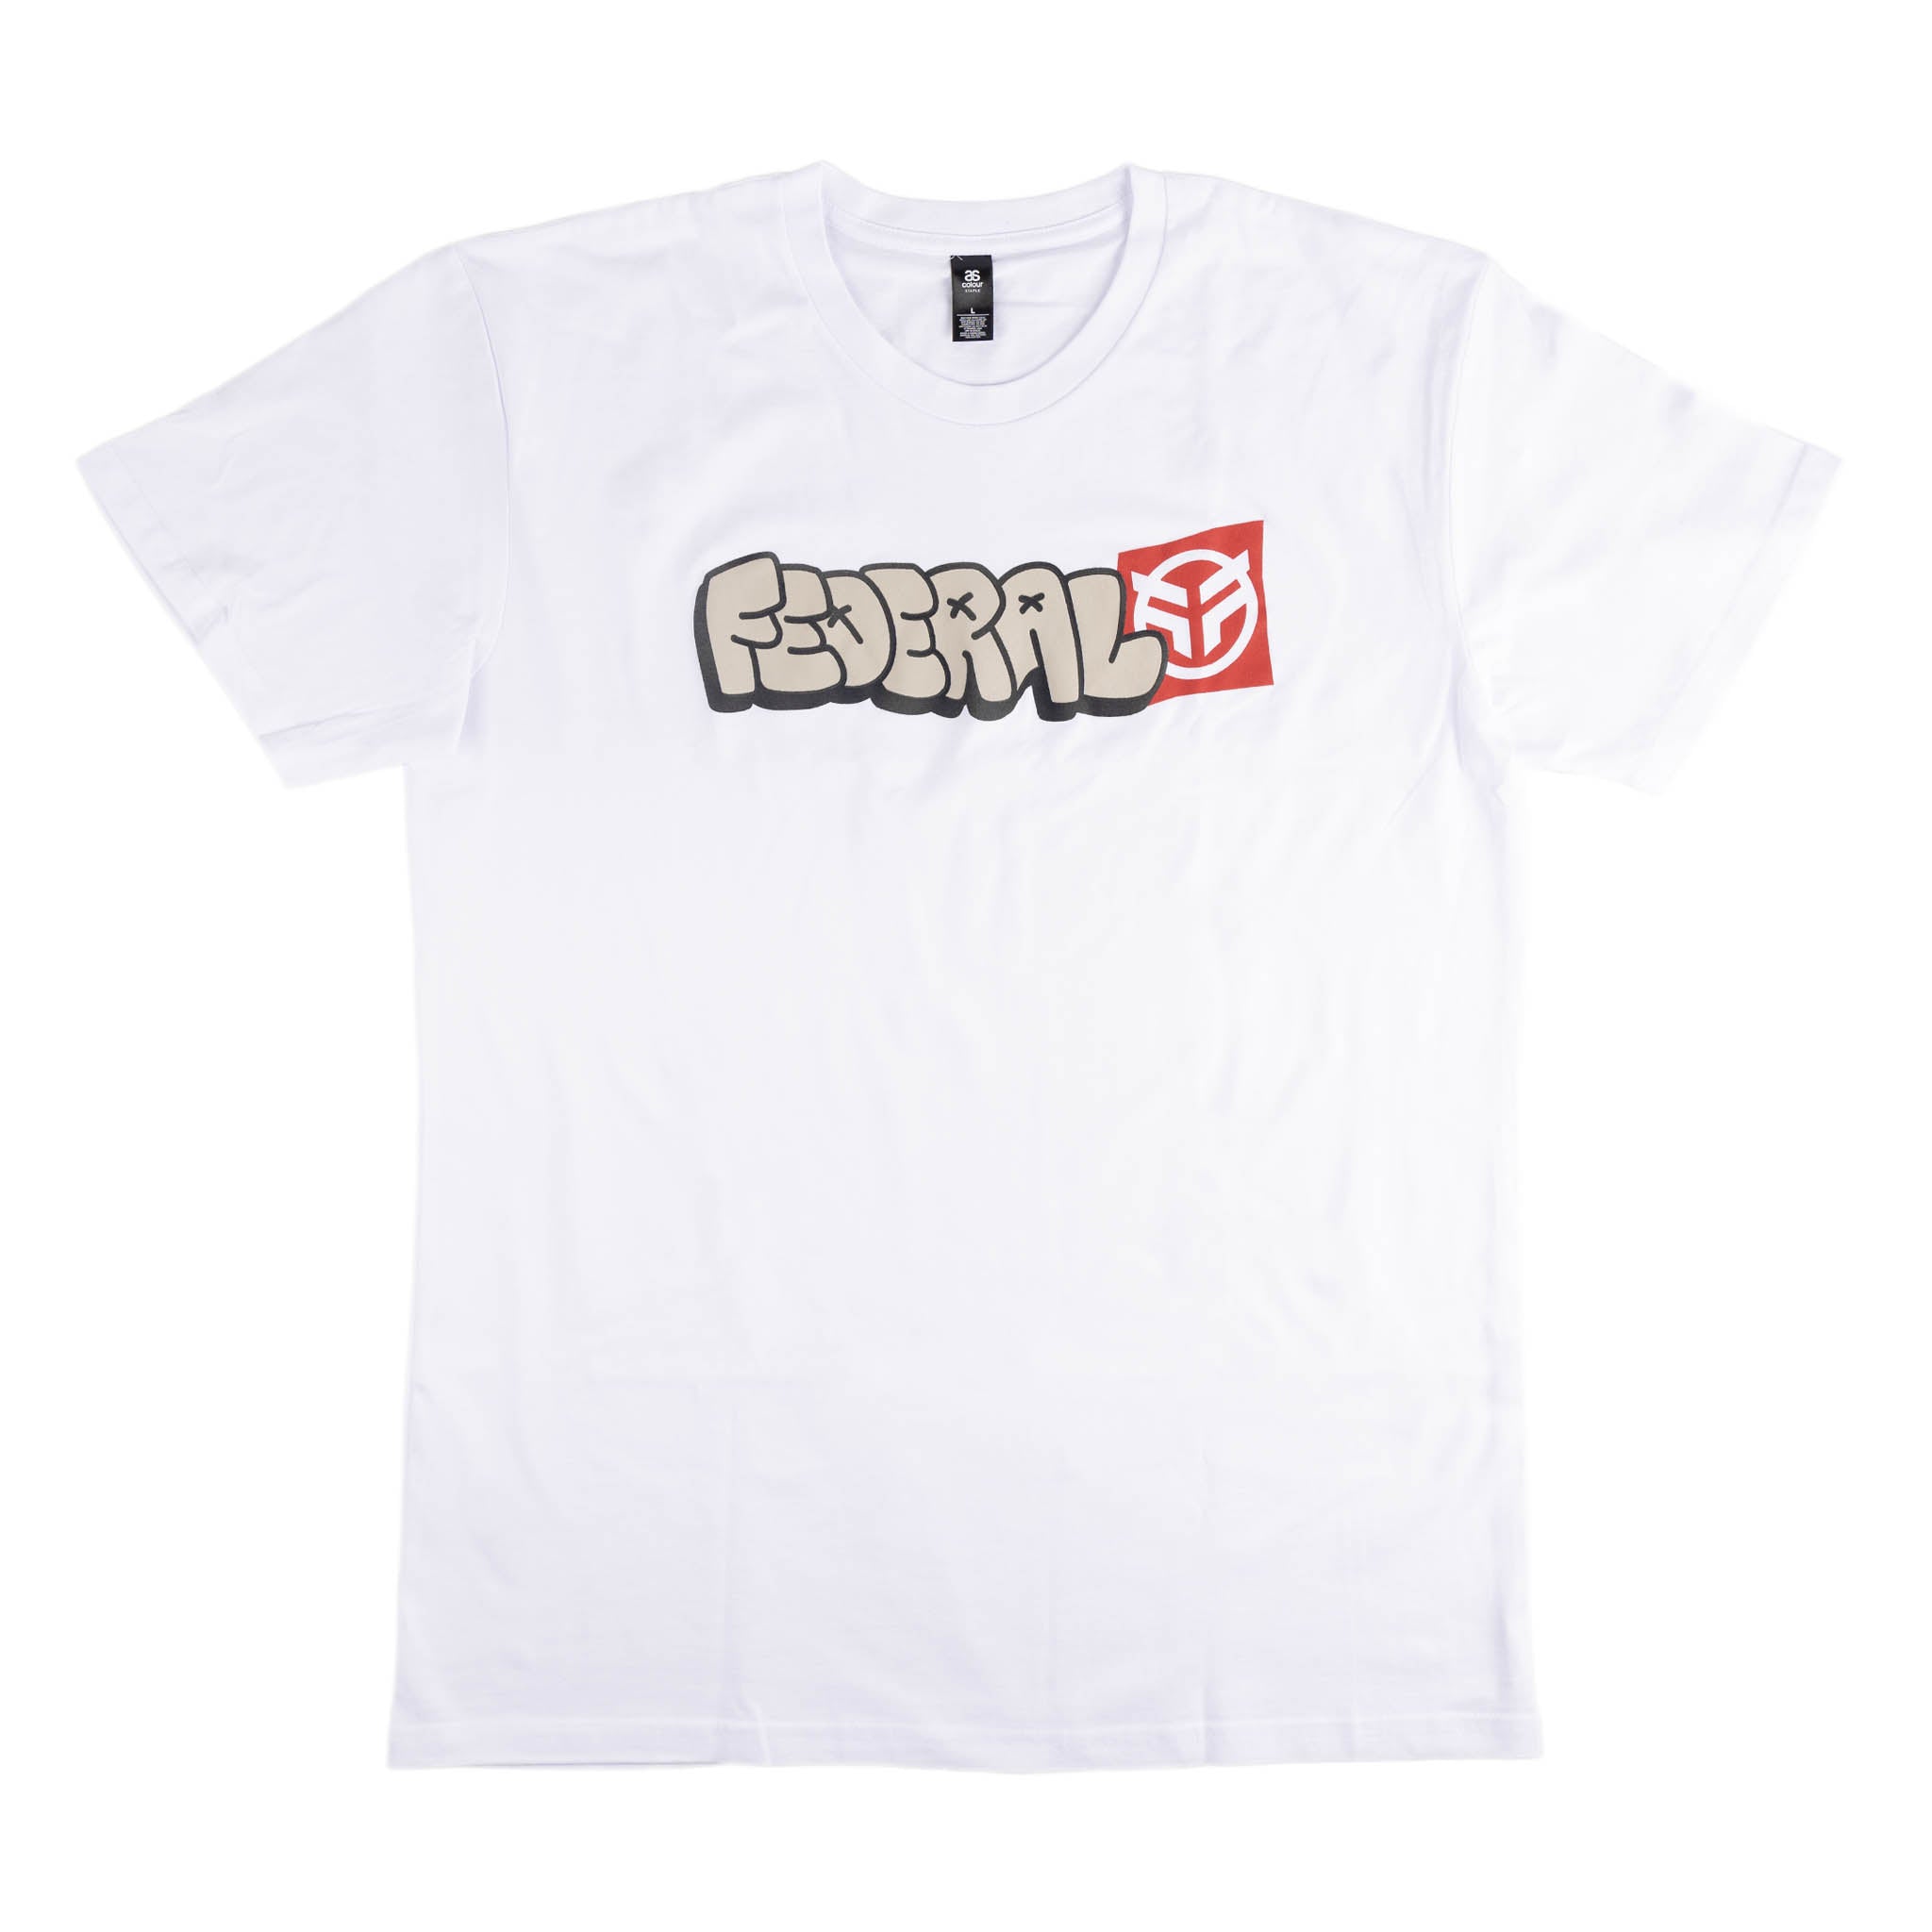 Federal Tagged T-Shirt - White front | Federal BMX